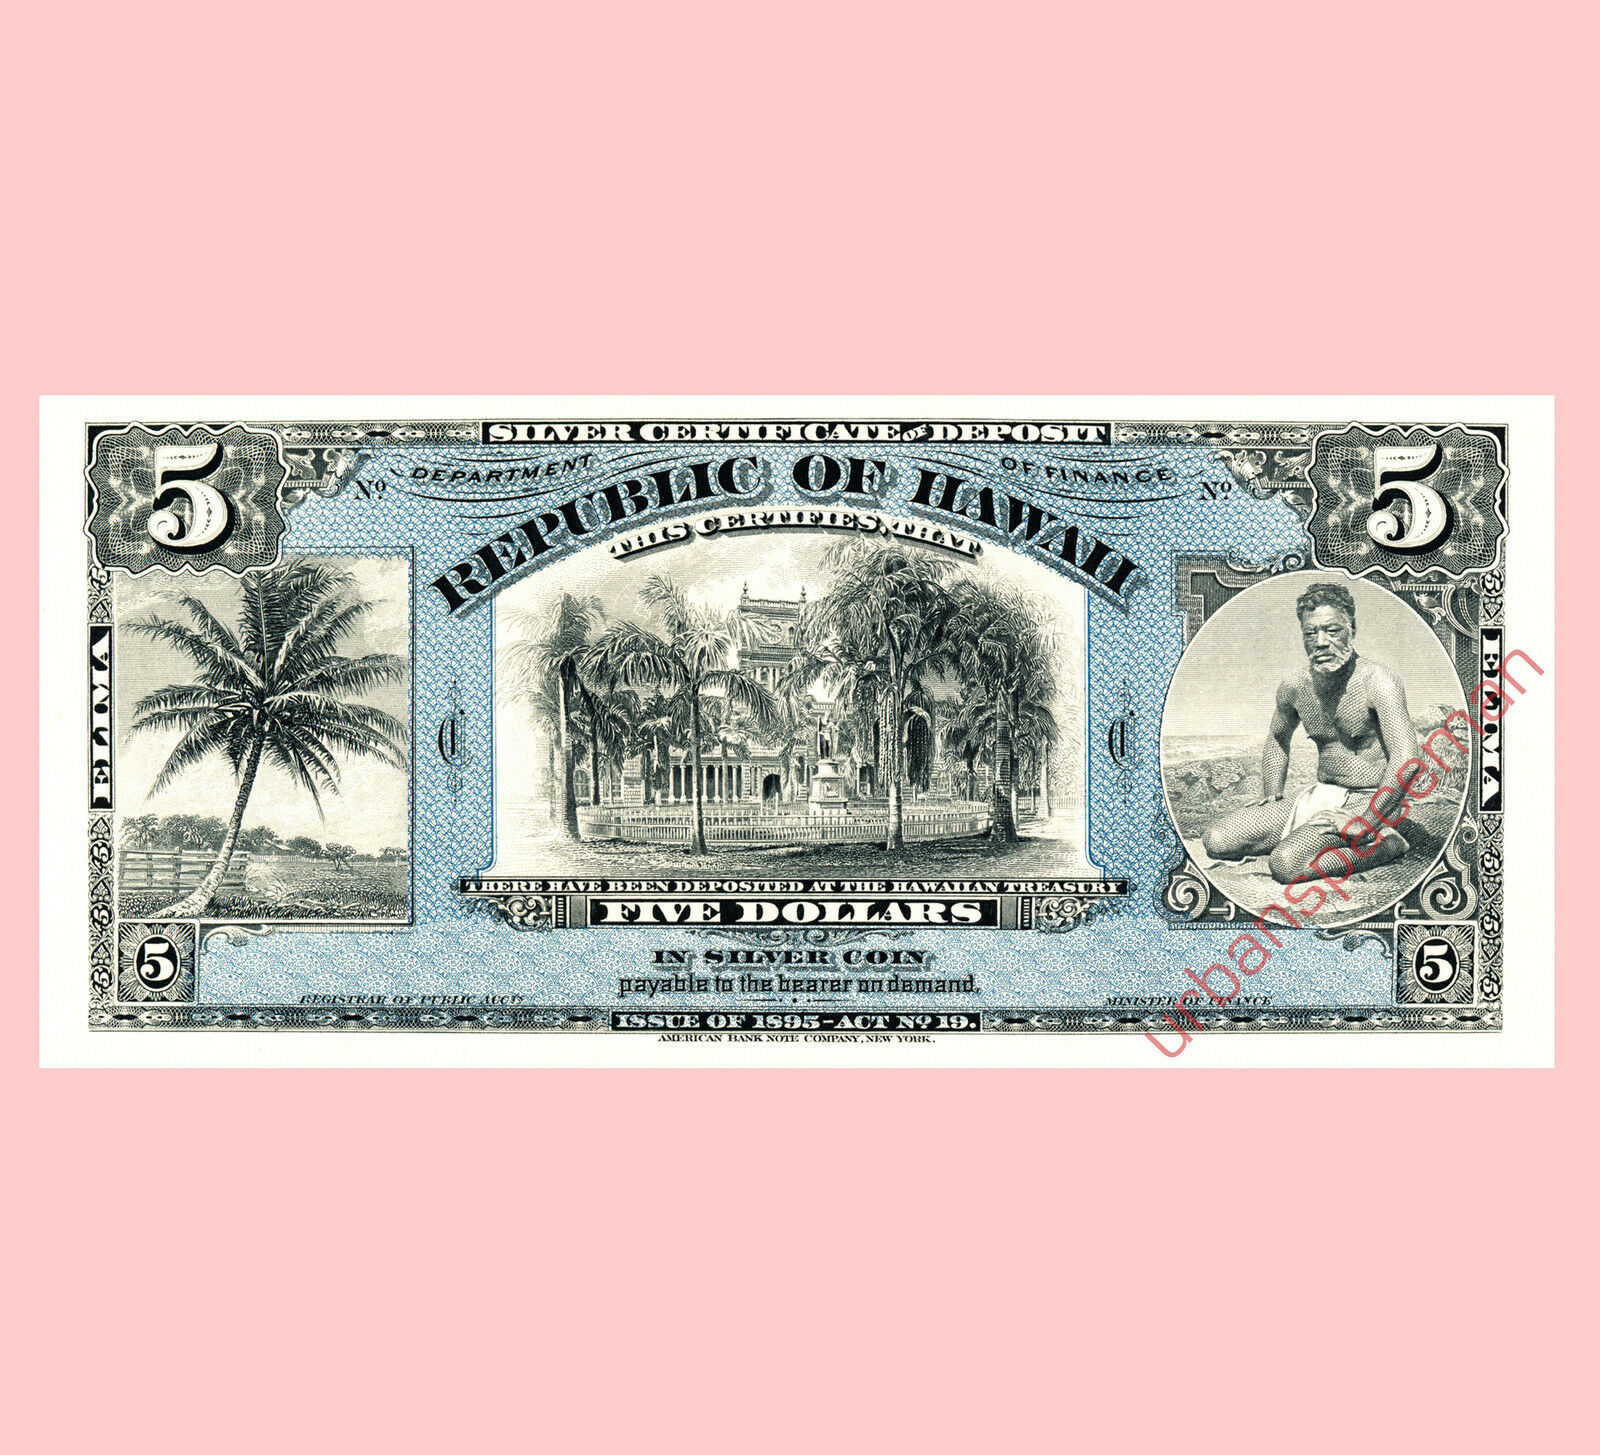 Abnc Proof Print - $5 Republic Of Hawaii Silver Certificate, 1895 Banknote